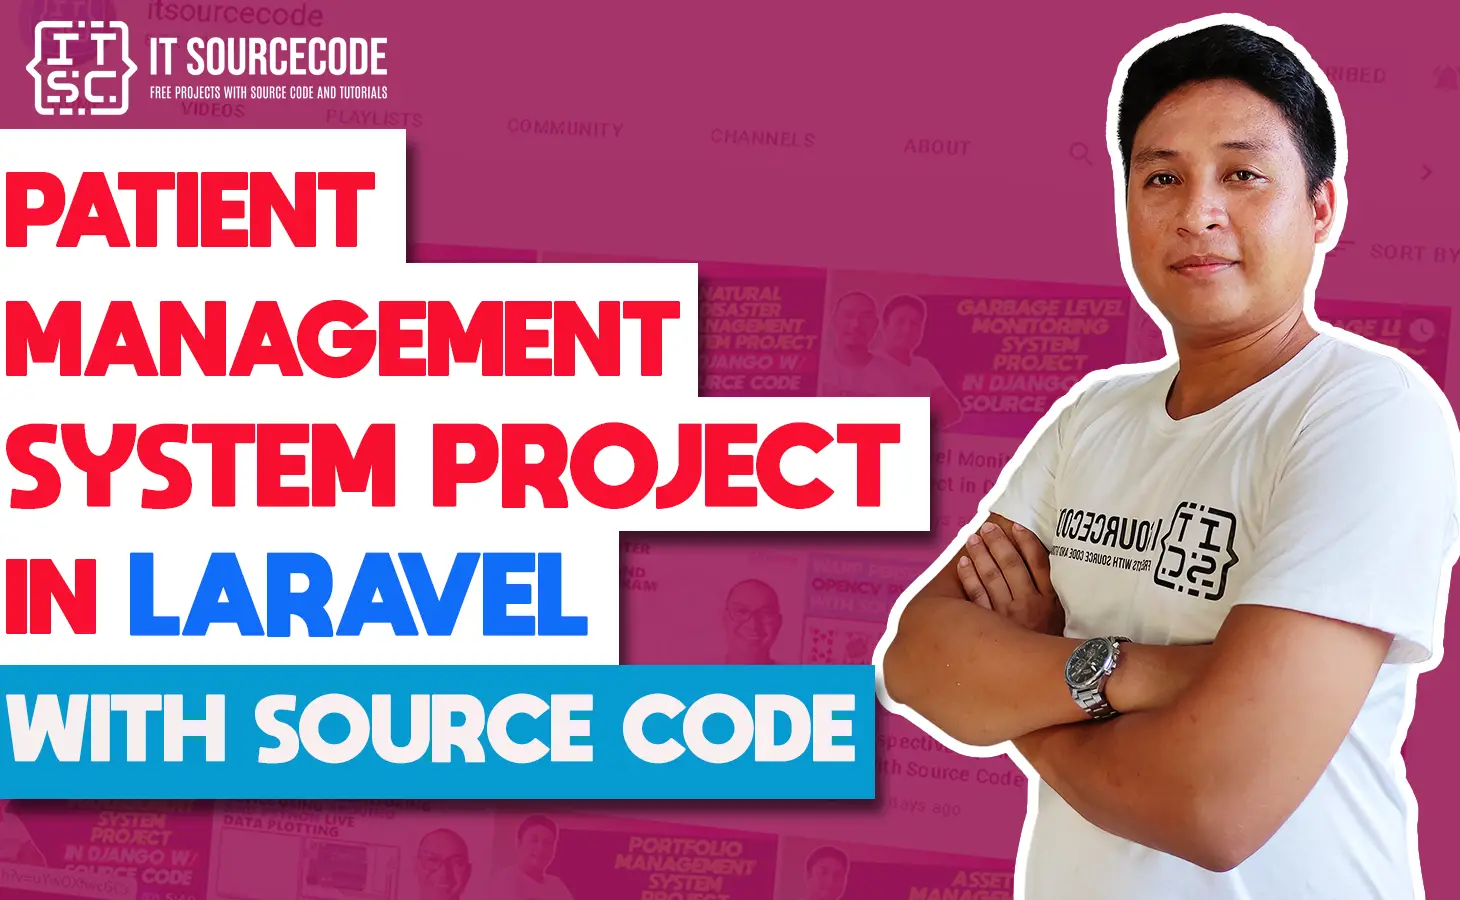 Patient Management System Project in Laravel with Source Code